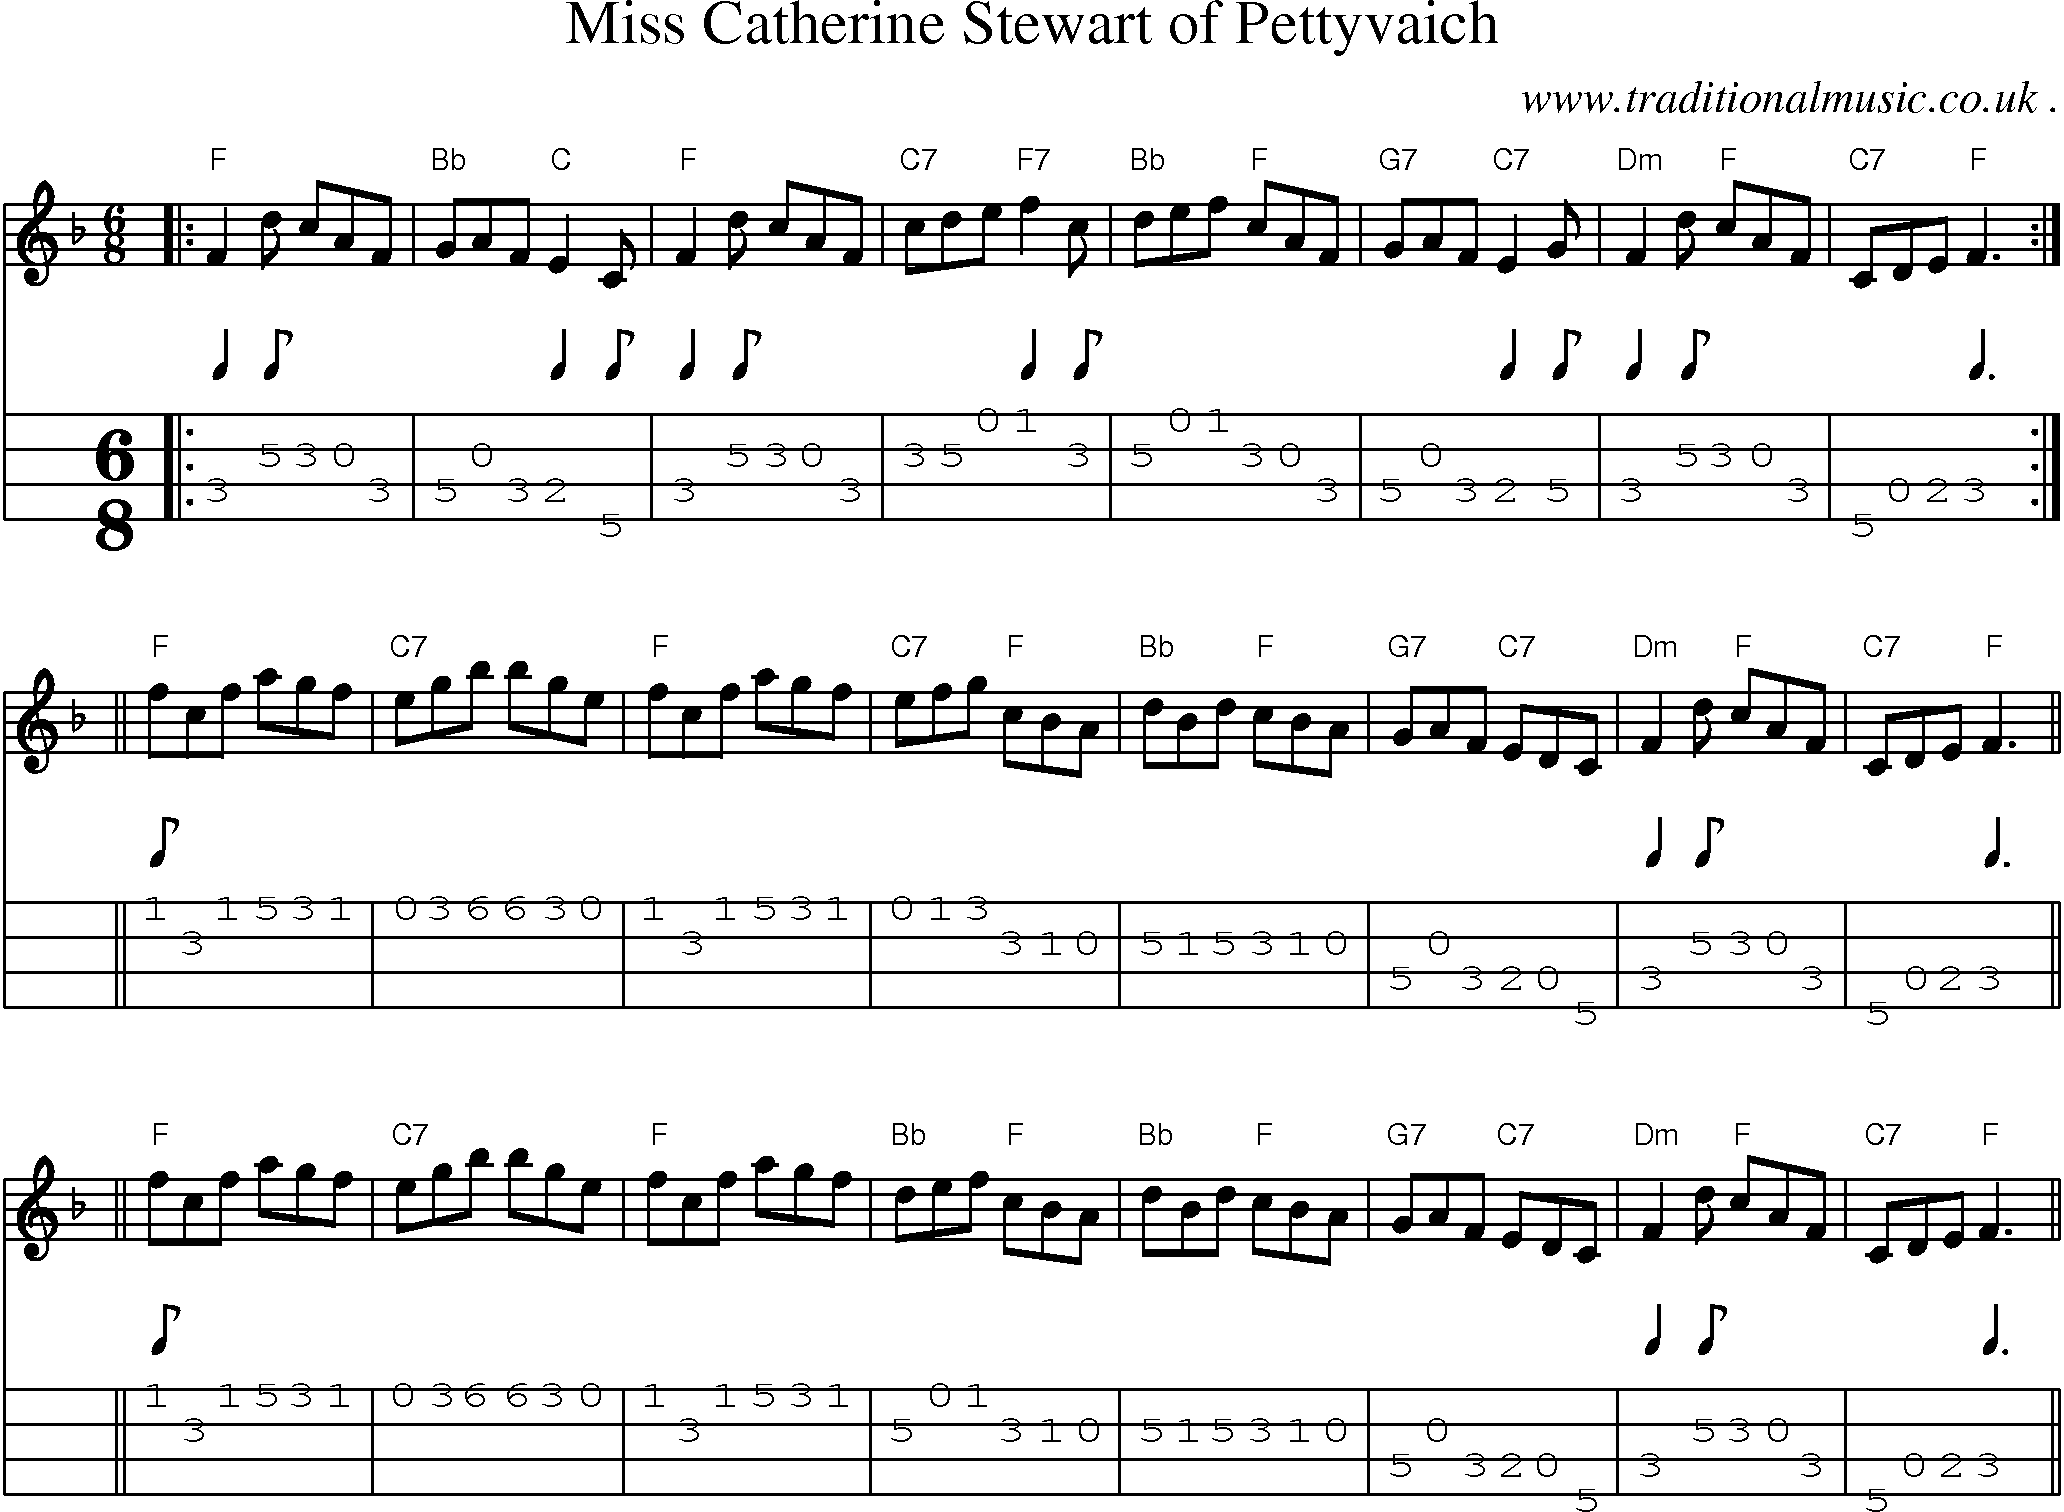 Sheet-music  score, Chords and Mandolin Tabs for Miss Catherine Stewart Of Pettyvaich